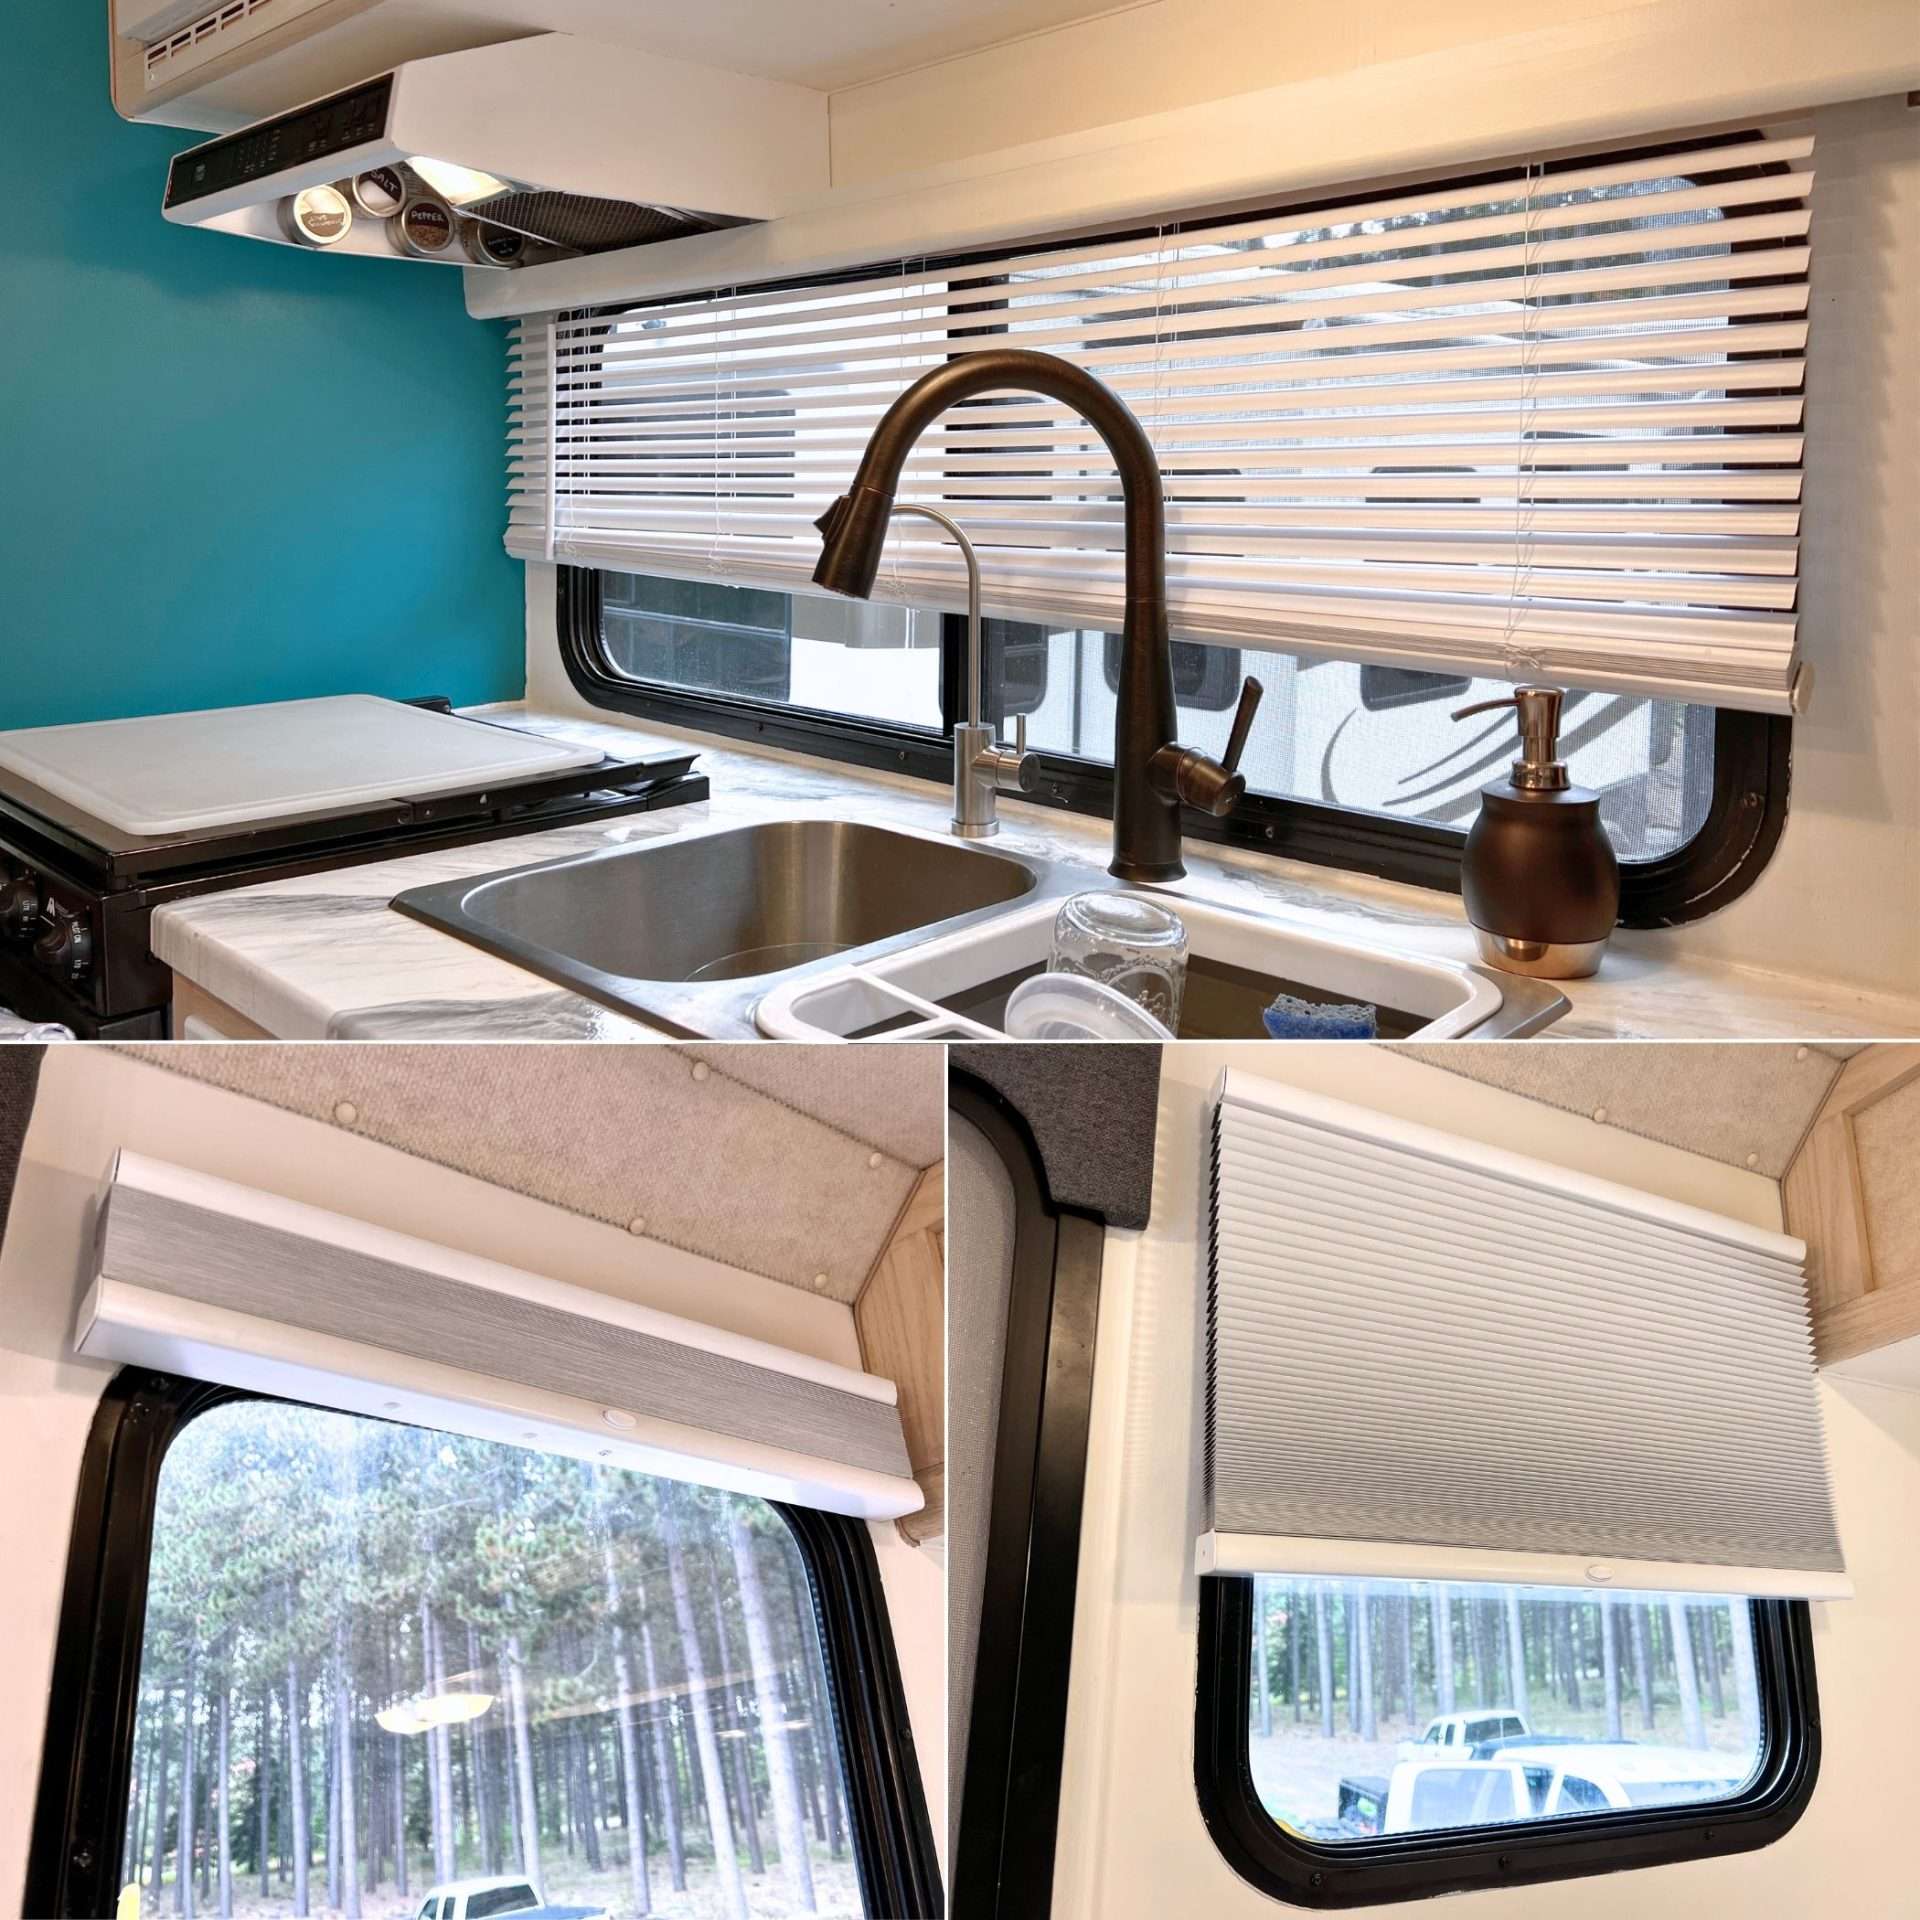 Residential blinds from Lowes in our truck camper RV.